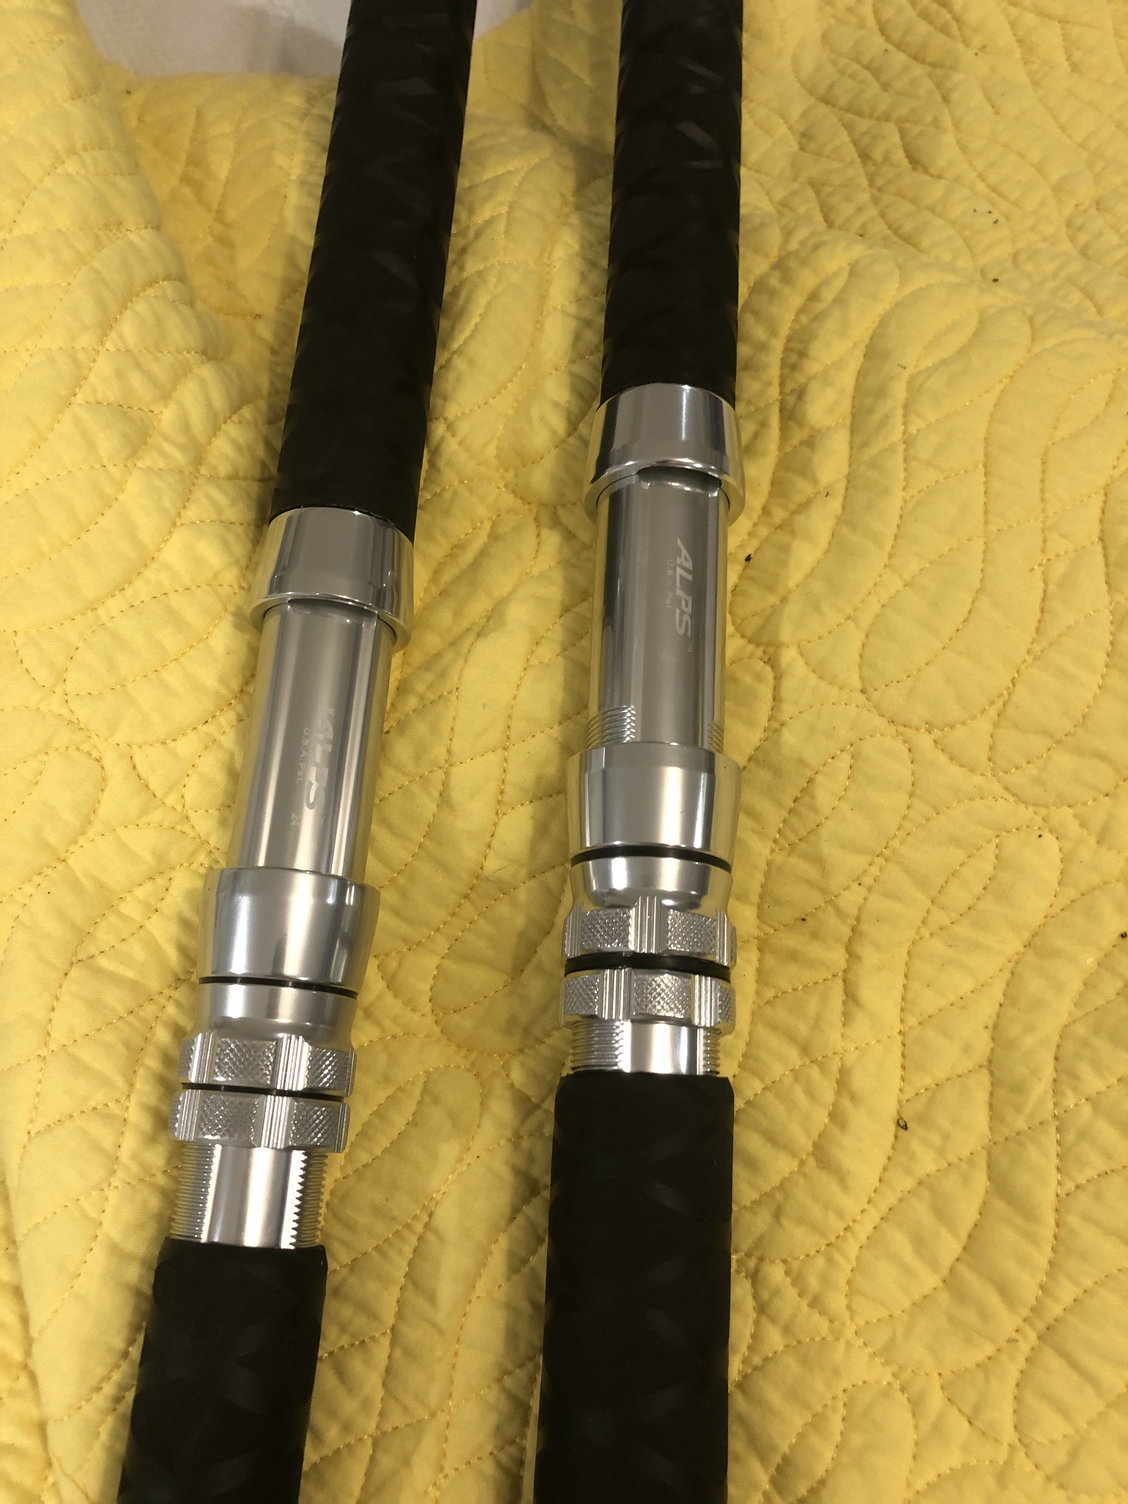 Pair of new custom black hole cow special spinning rods - $650 ea